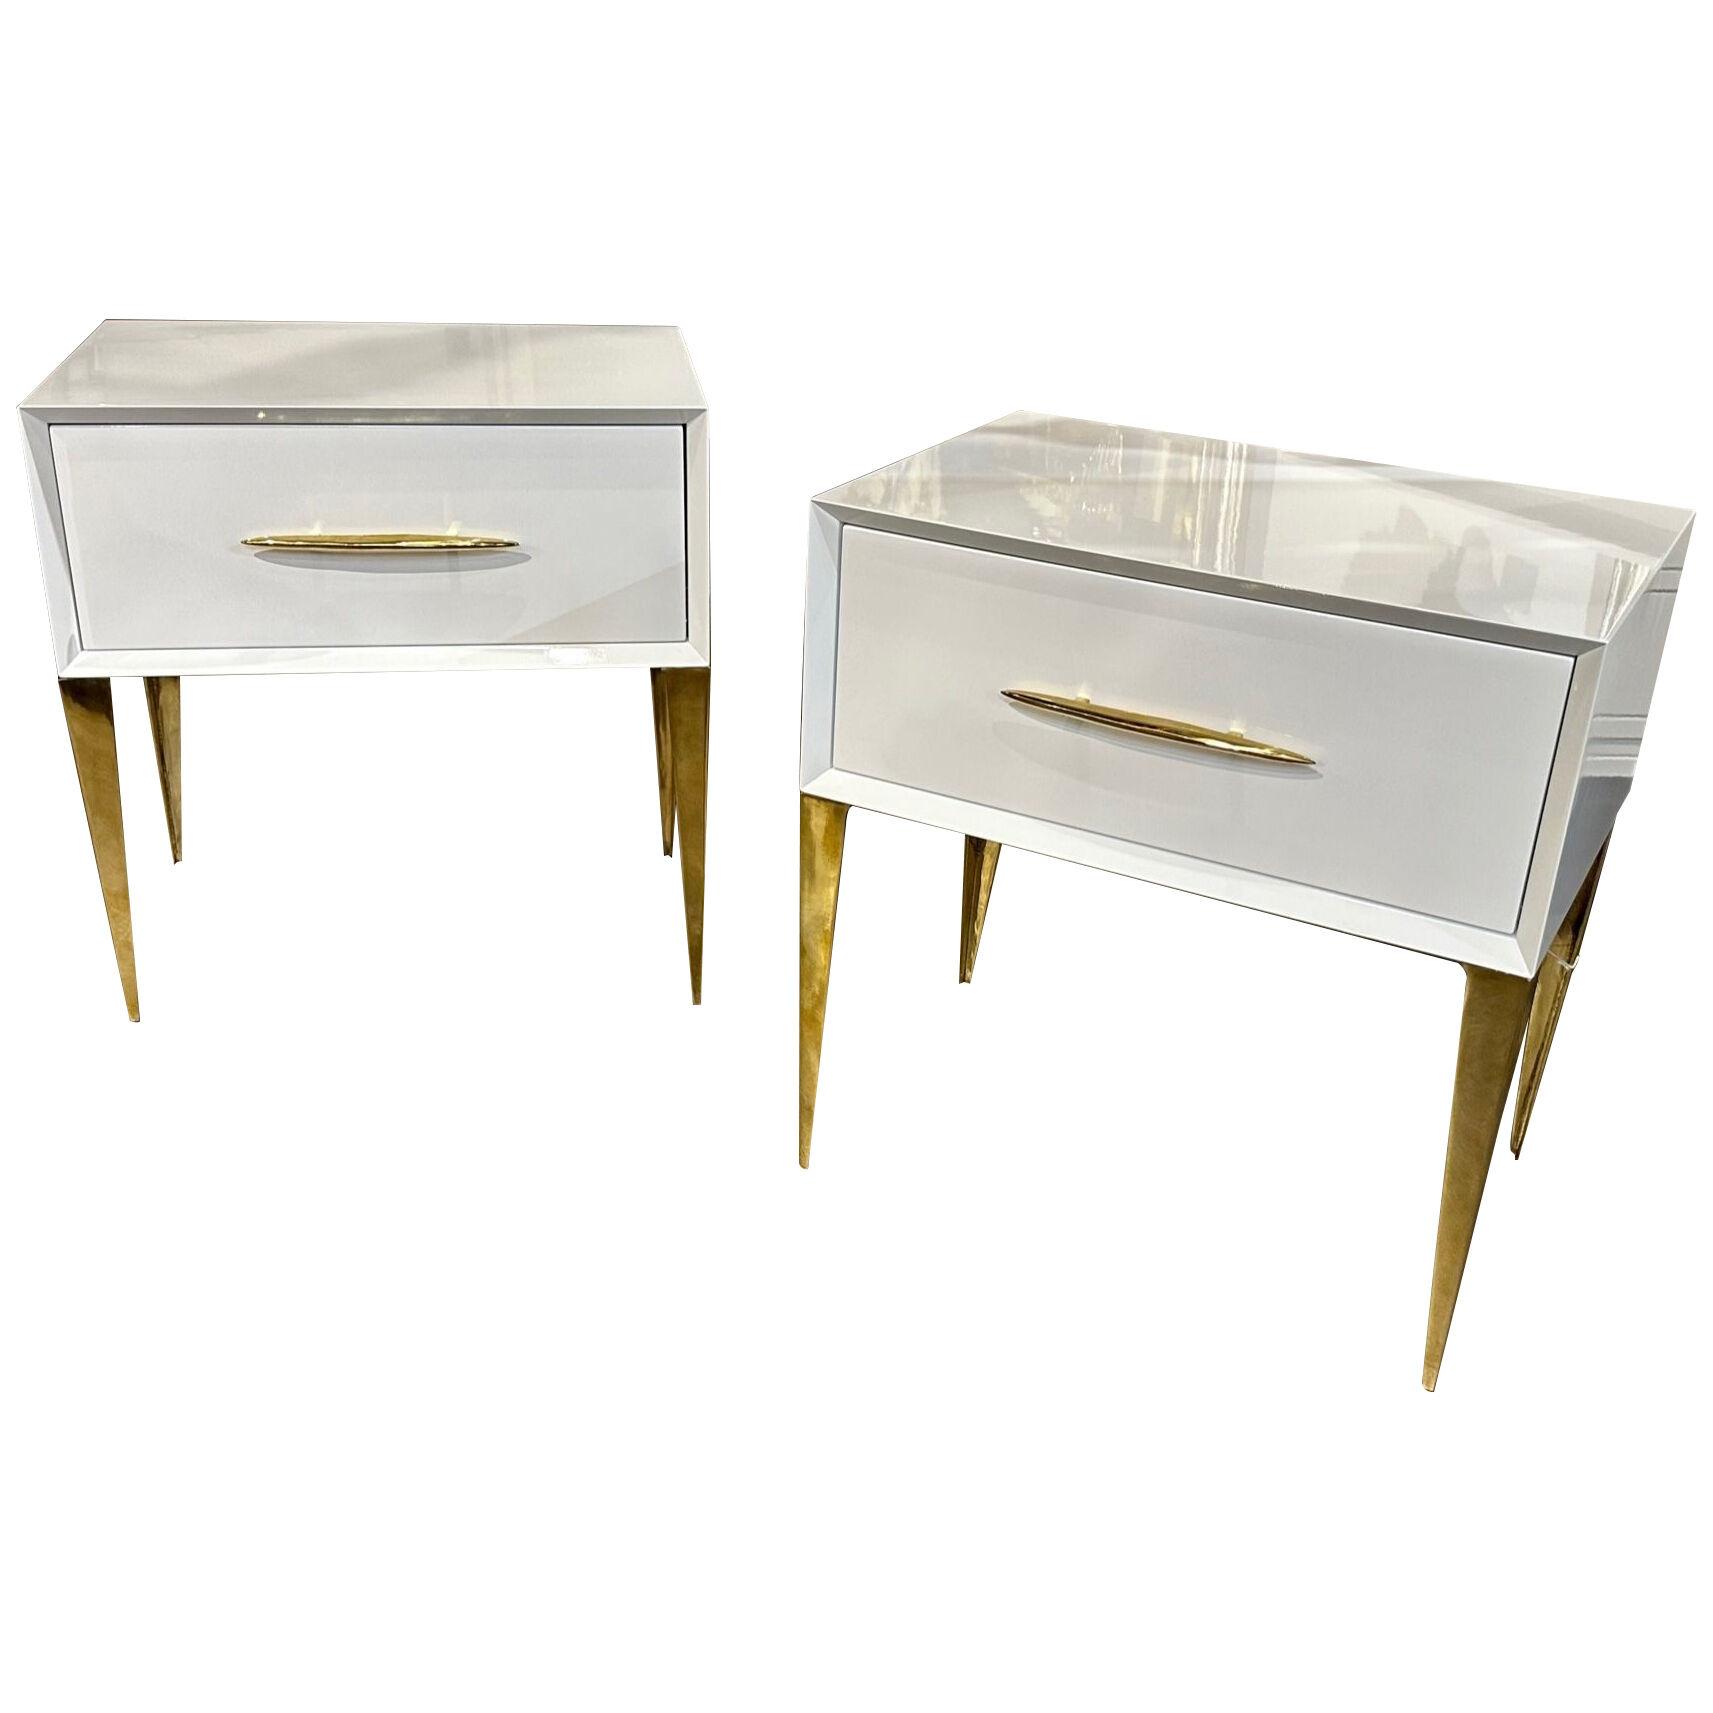 Pair of Italian White Piano Lacquer Side Tables